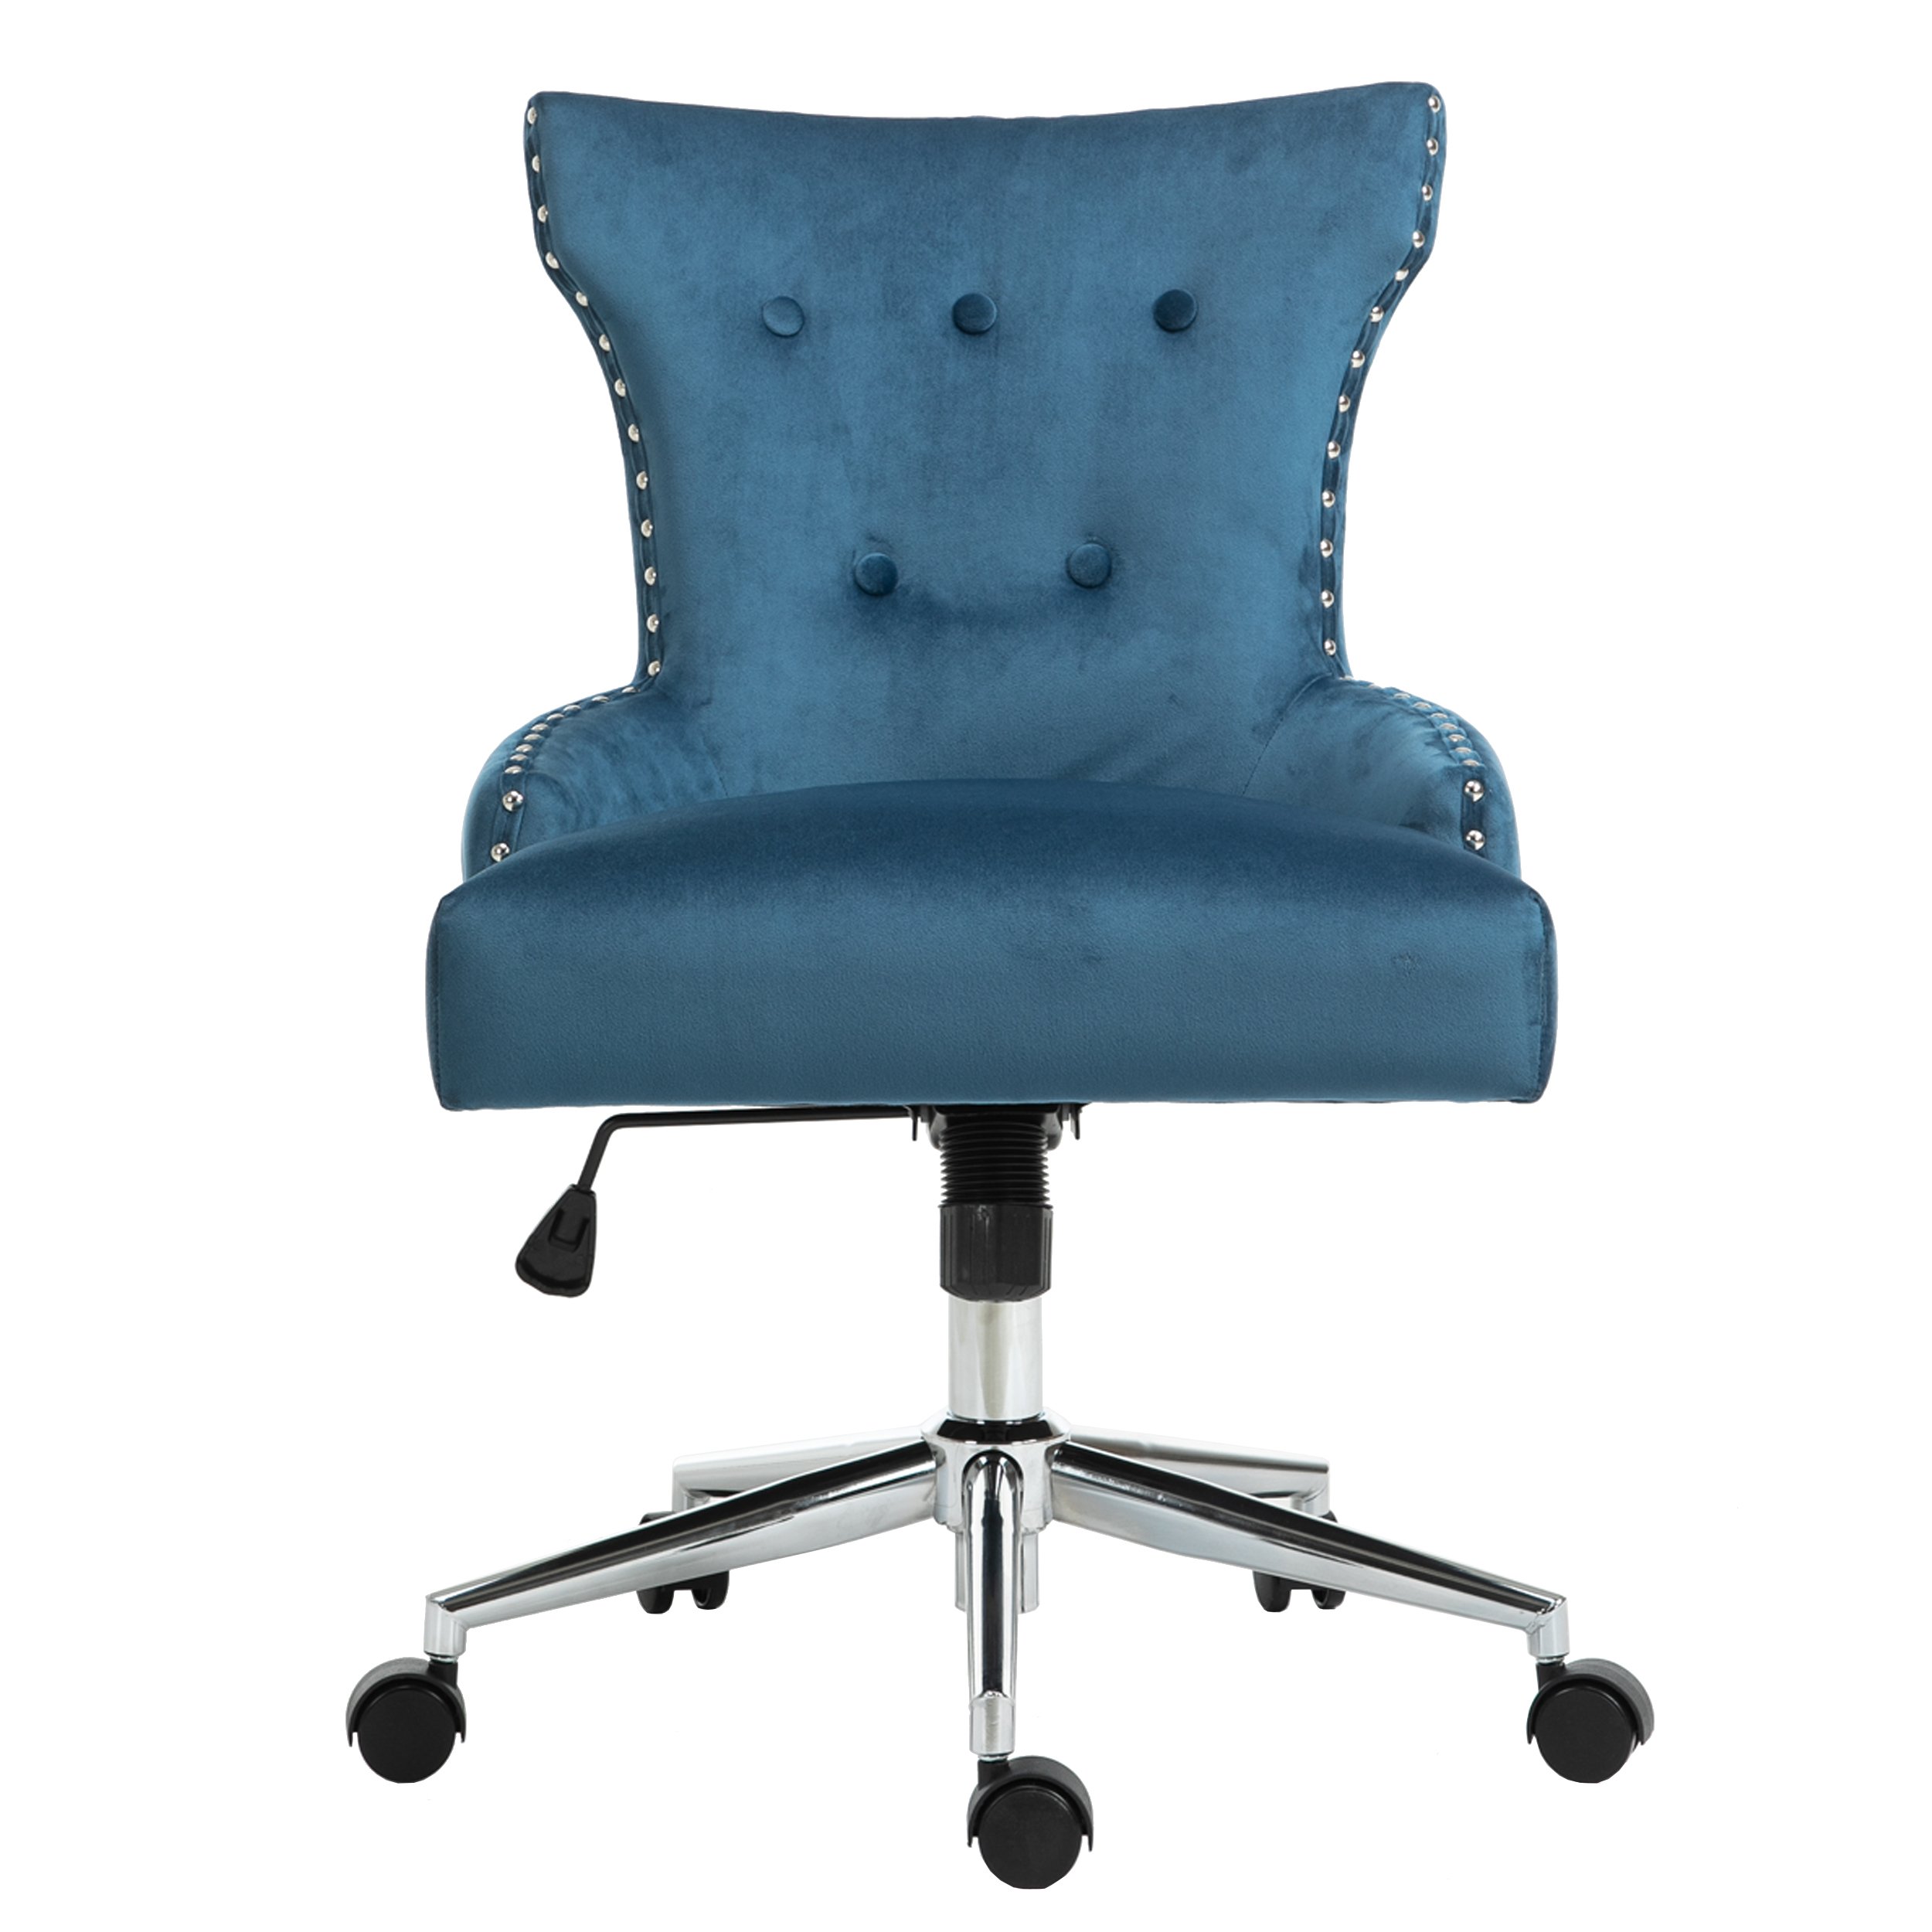 The classical Chair with Tilted Seat-CASAINC